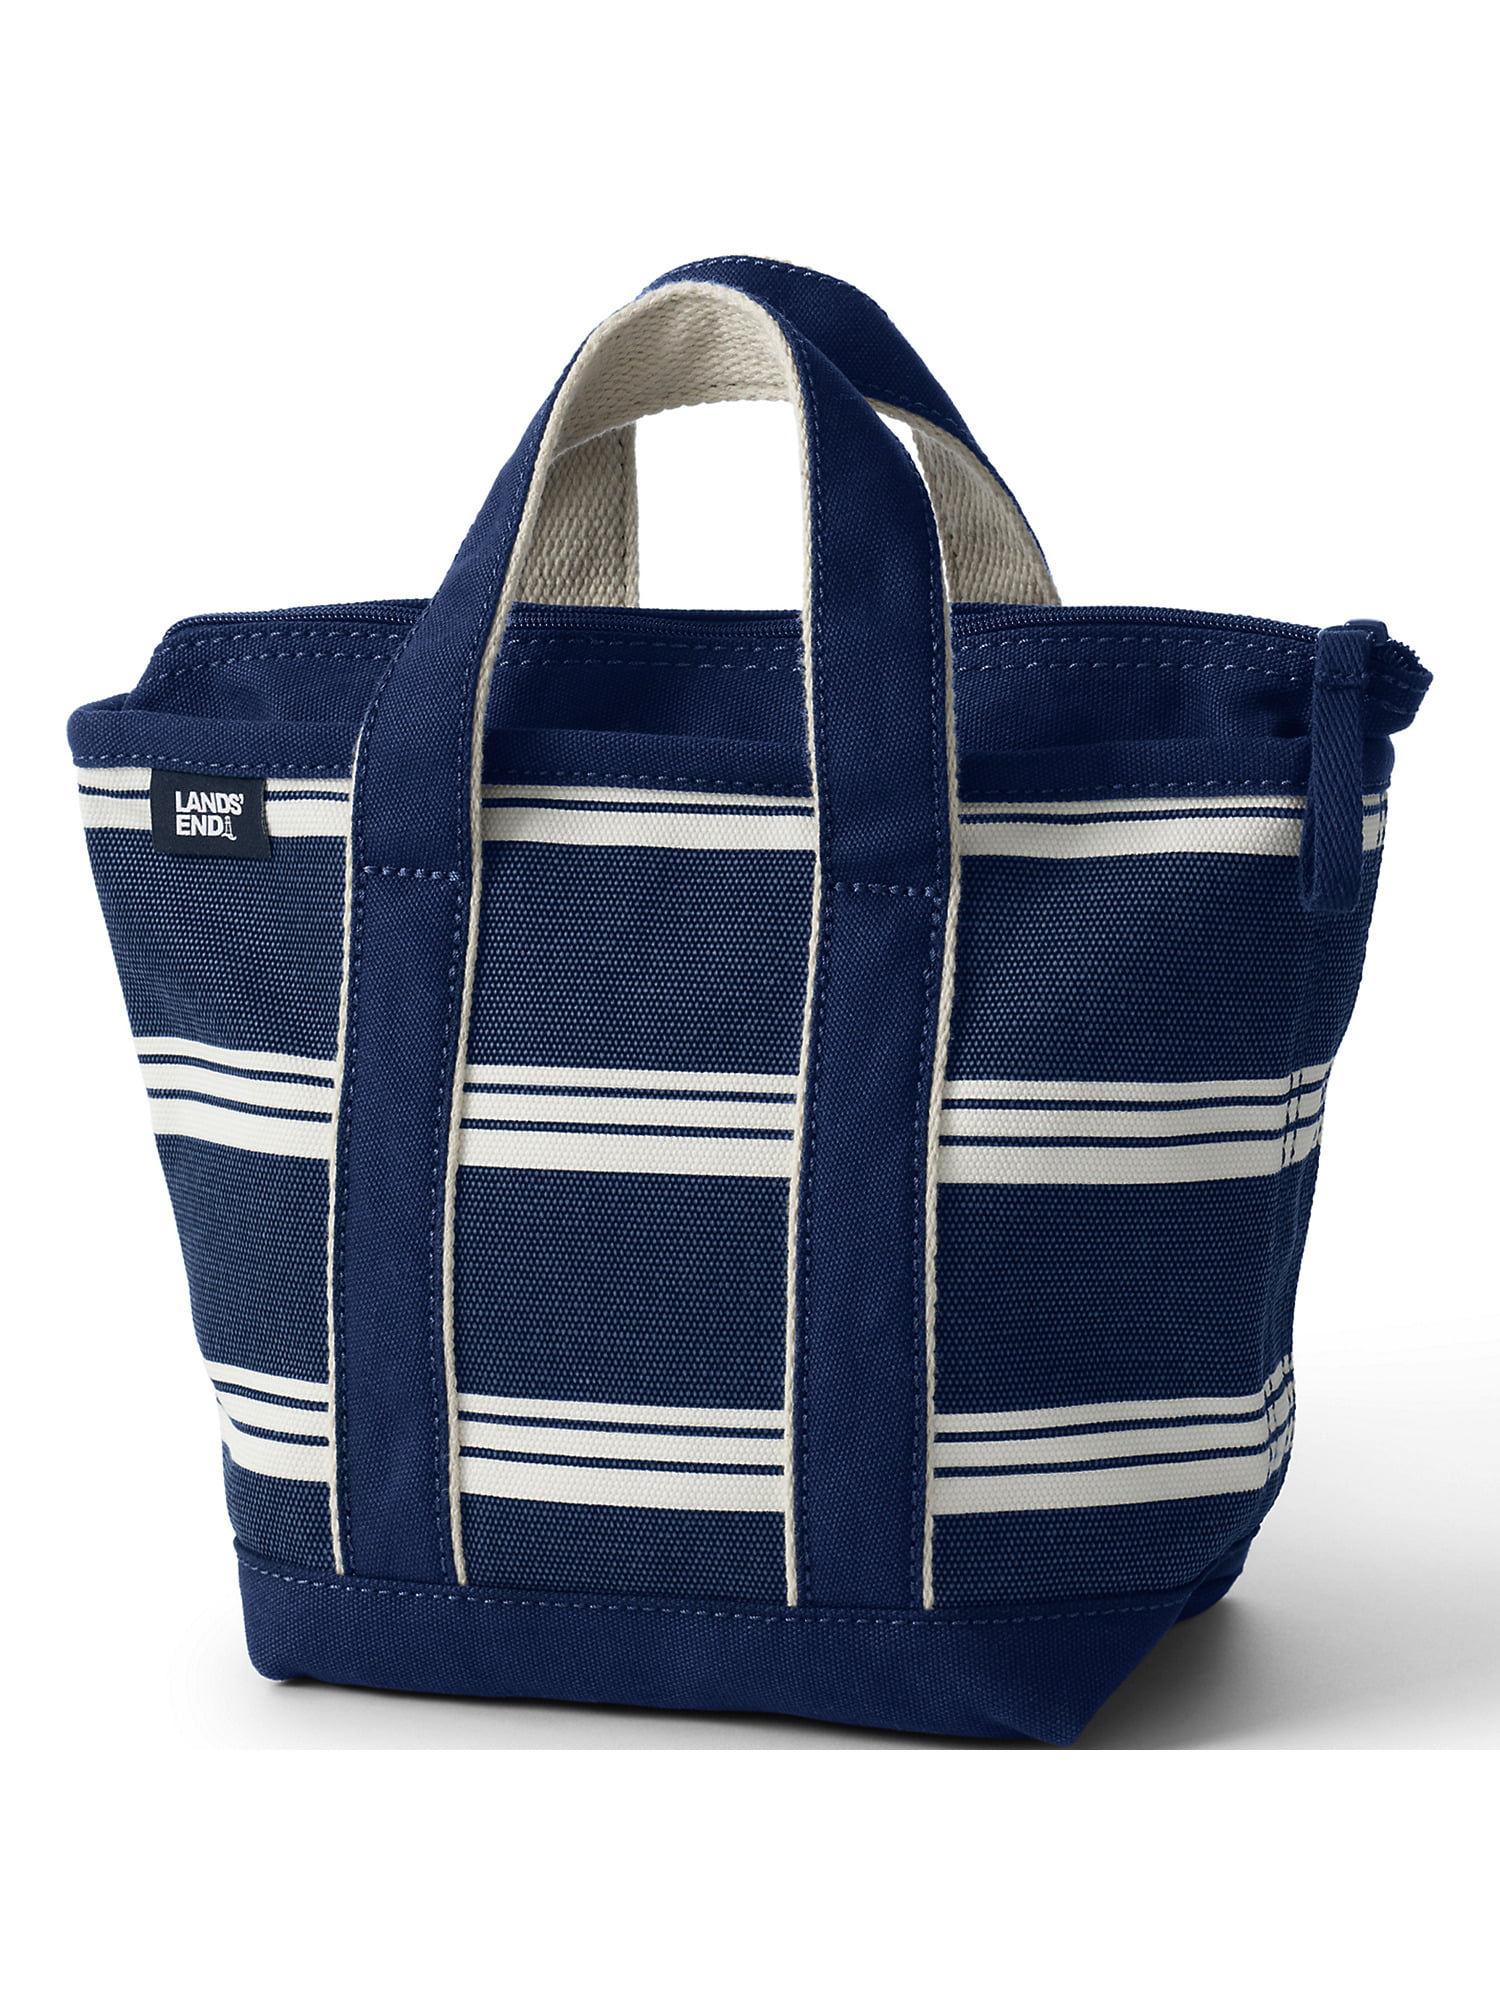 Lands' End Small Natural Zip Top Canvas Tote Bag 